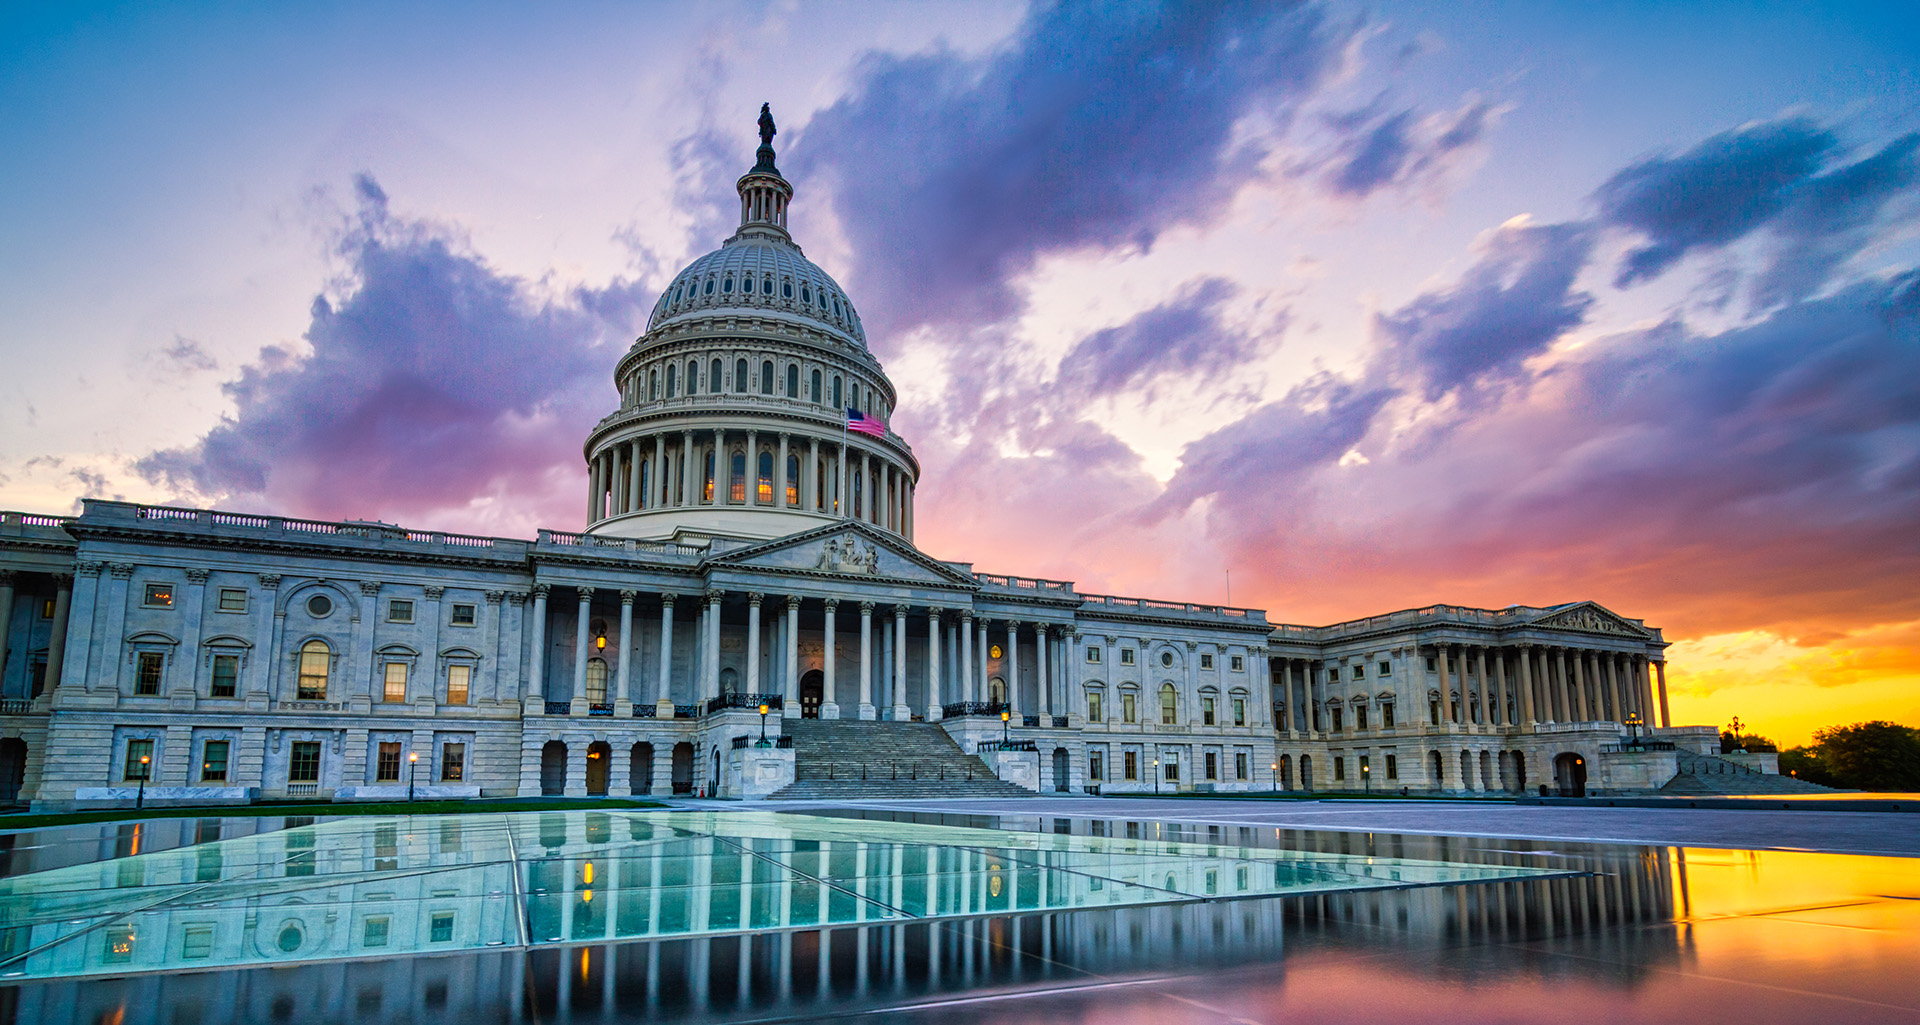 Iron Mountain provides government solutions for the federal government in the public sector.